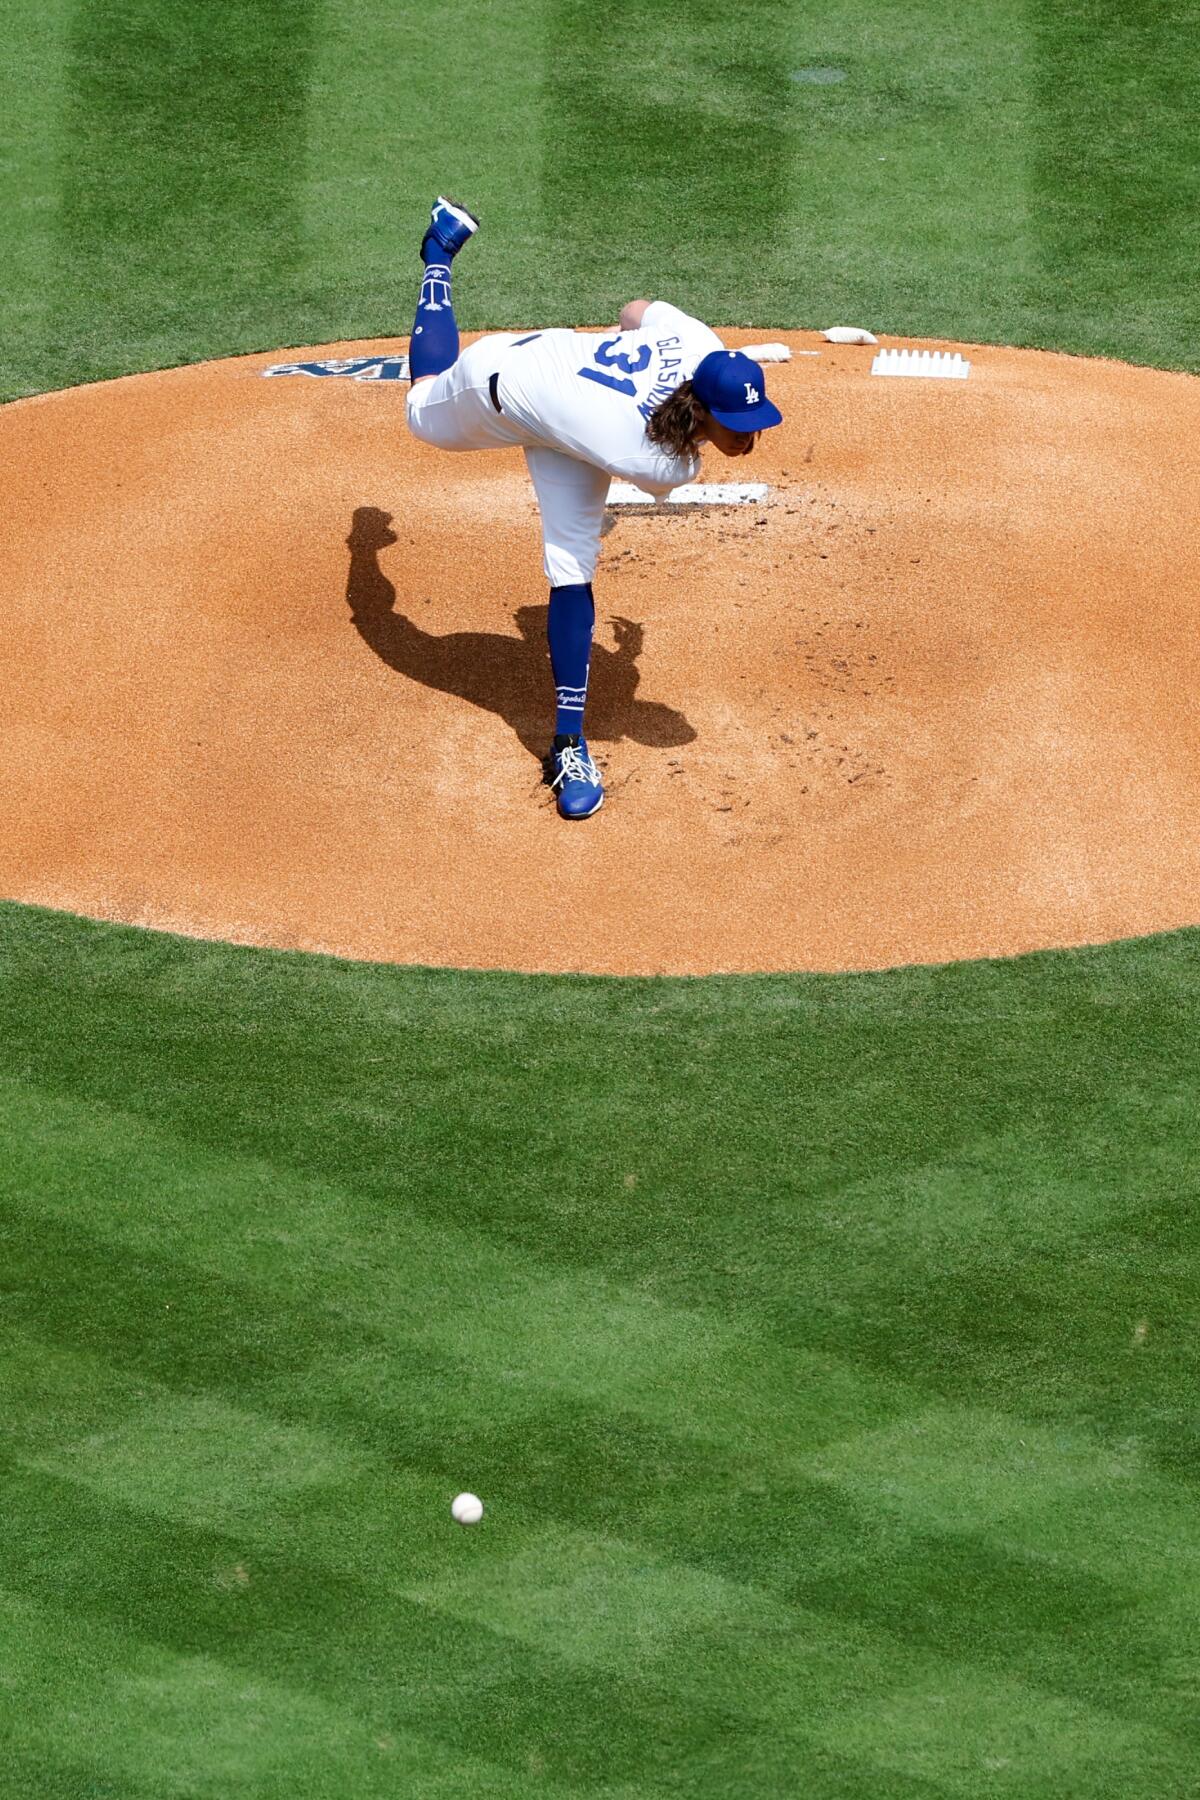 Dodgers starting pitcher Tyler Glasnow delivers during the first inning Thursday at Dodger Stadium.